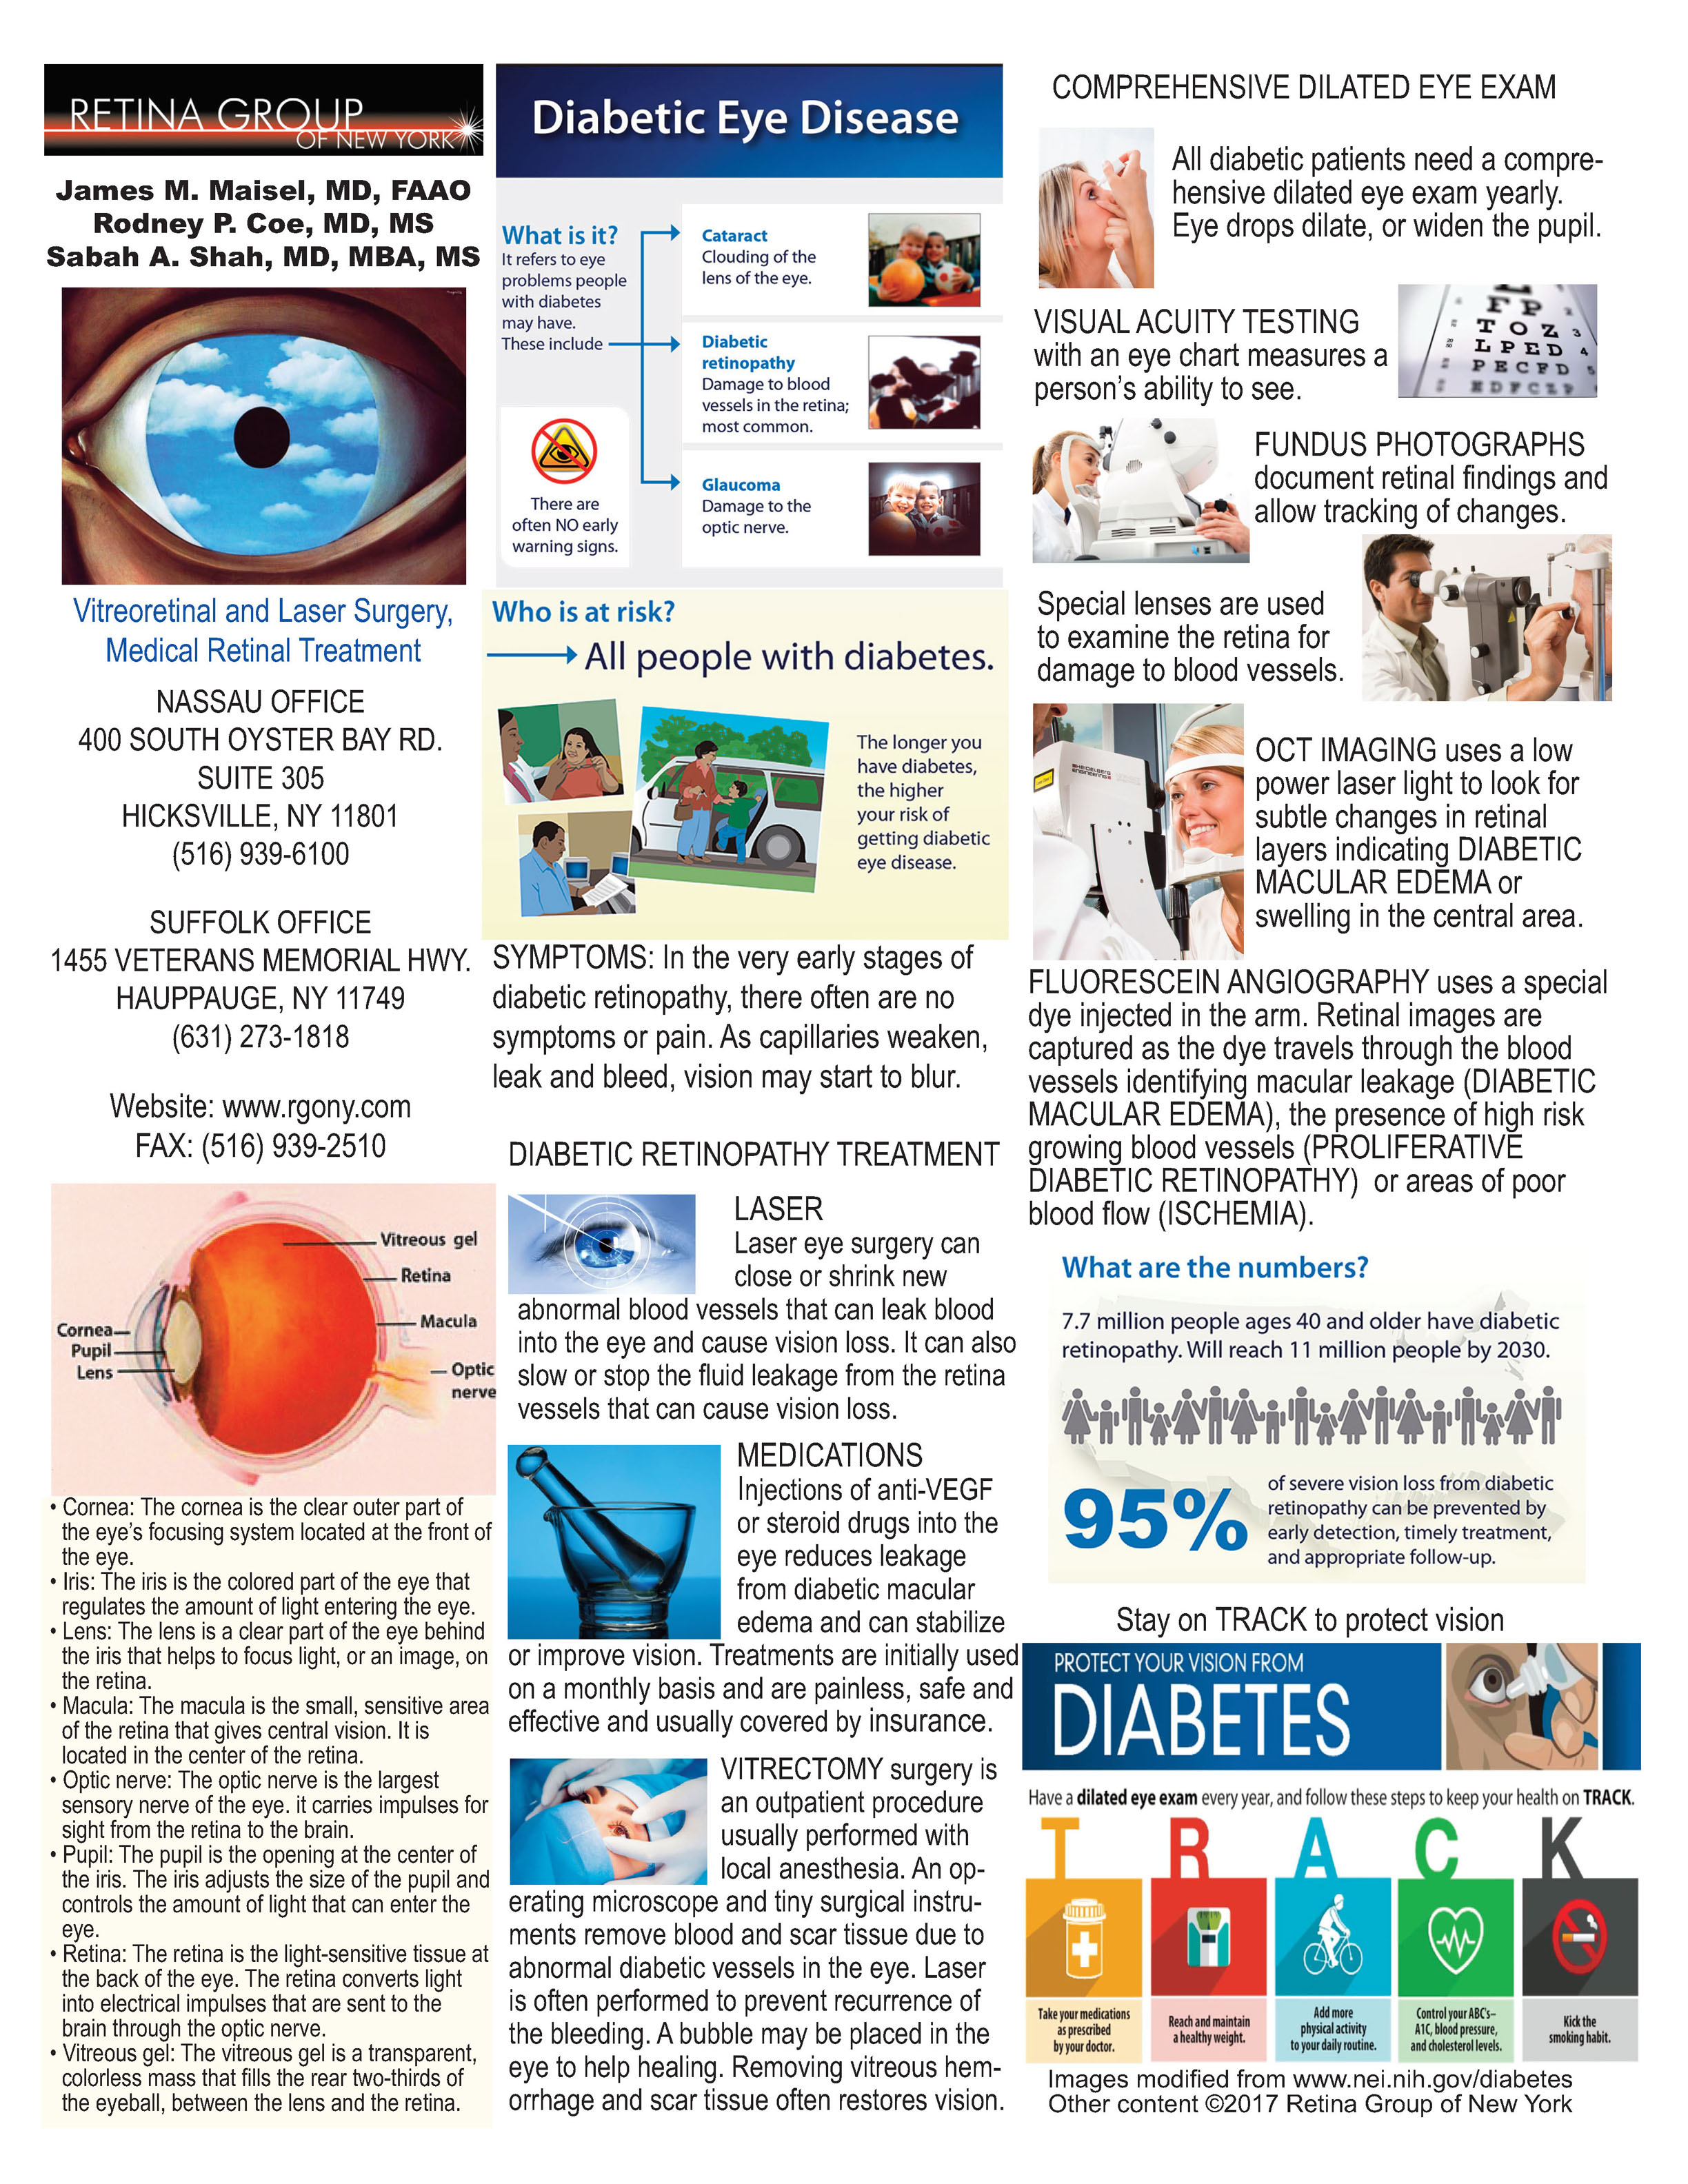 Retina Group of New York Diabetic Education Pamphlet